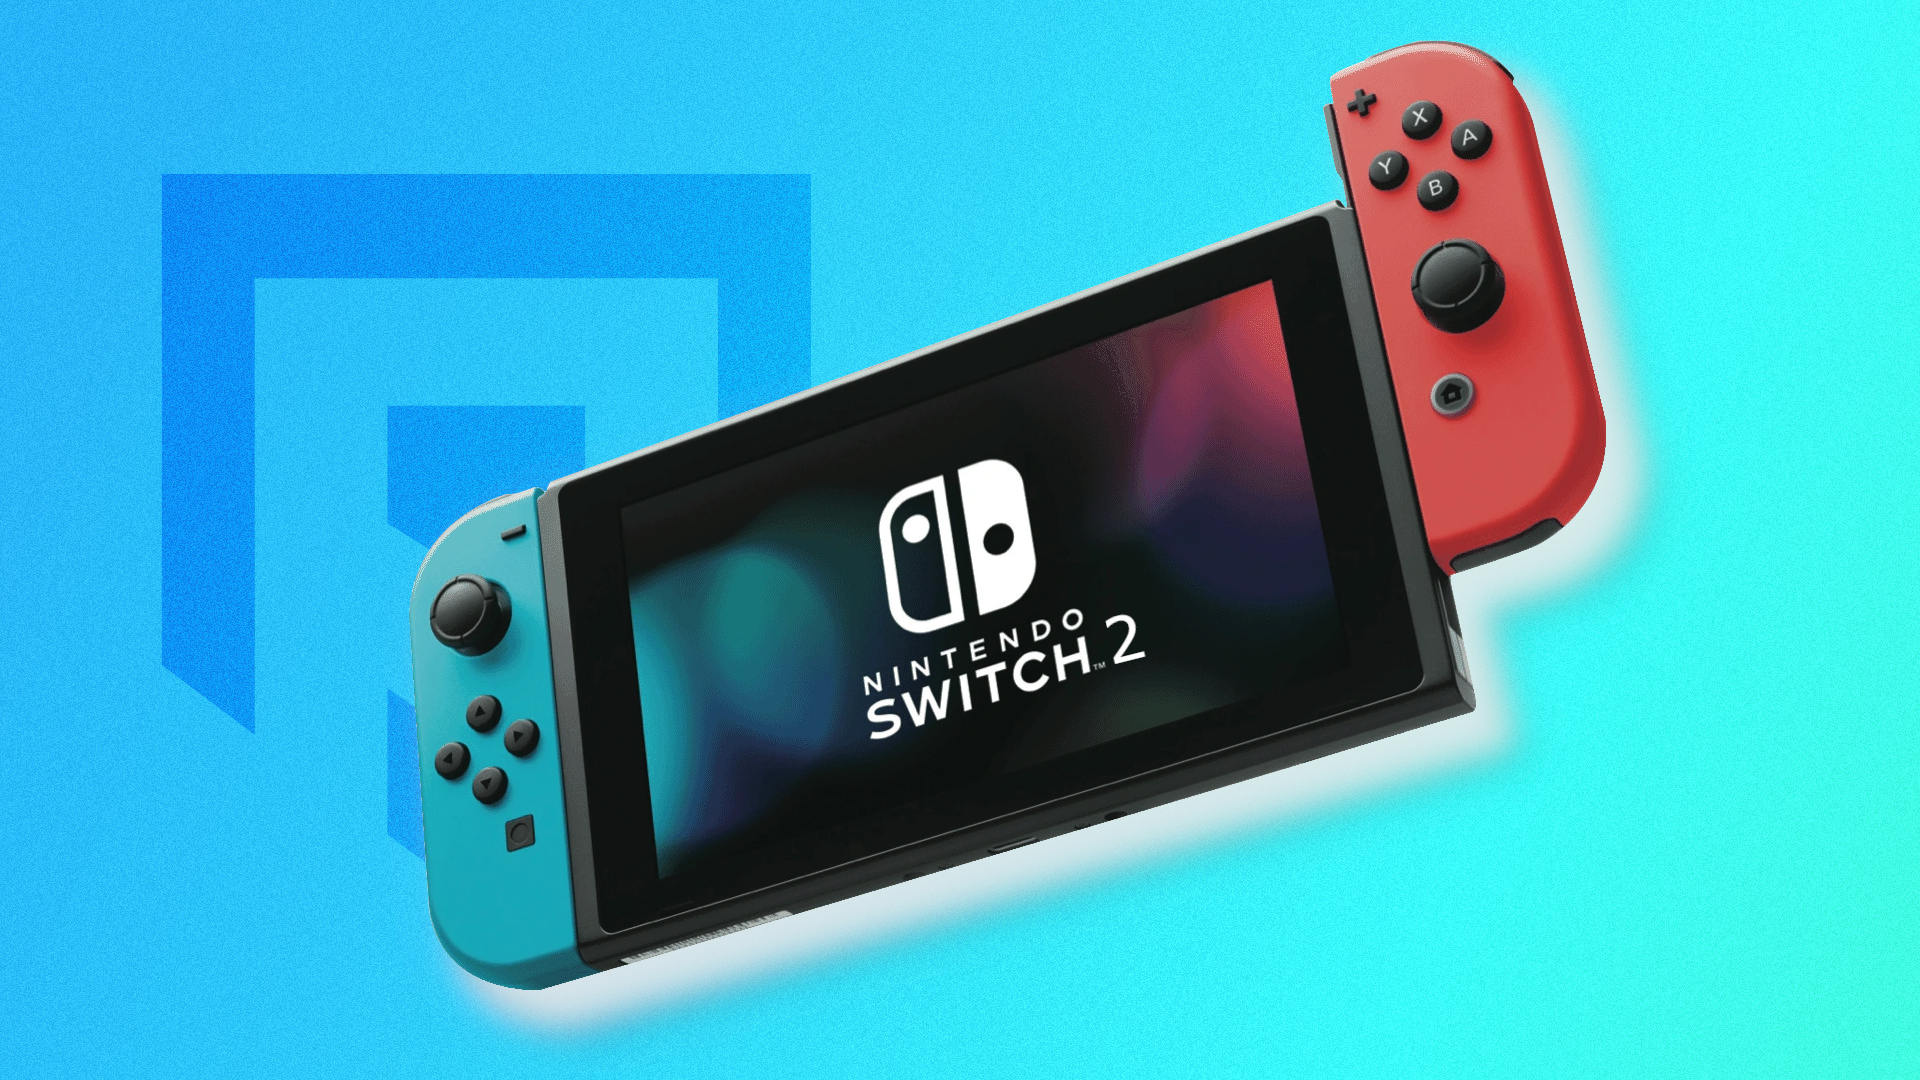 Nintendo Switch price, launch date and everything you get with it